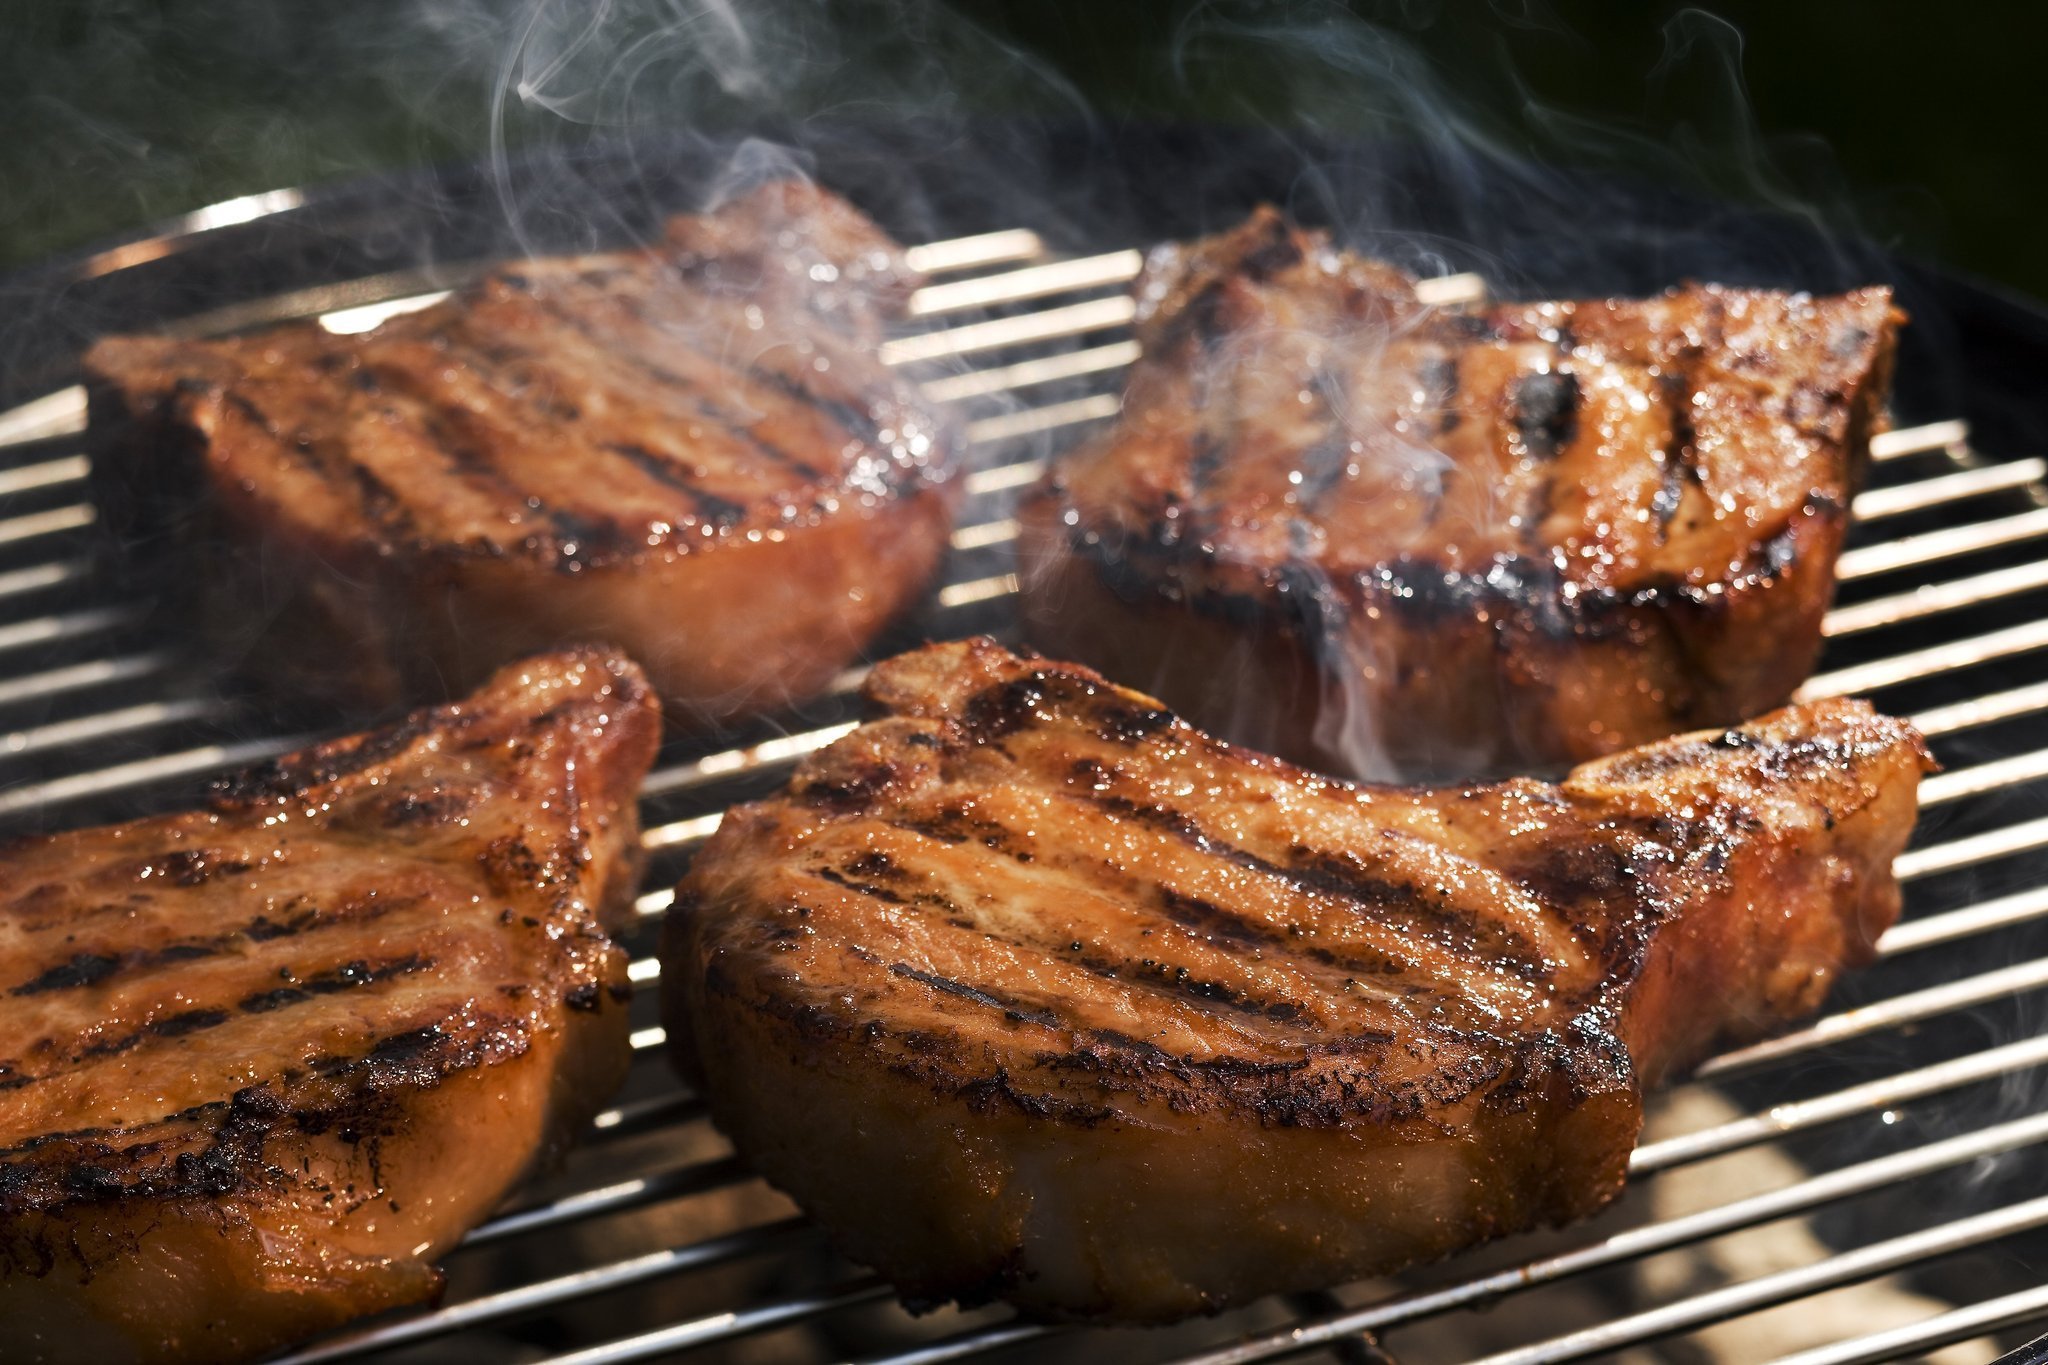 Grilling Is An American Pastime But Cancer Experts Urge Moderation 